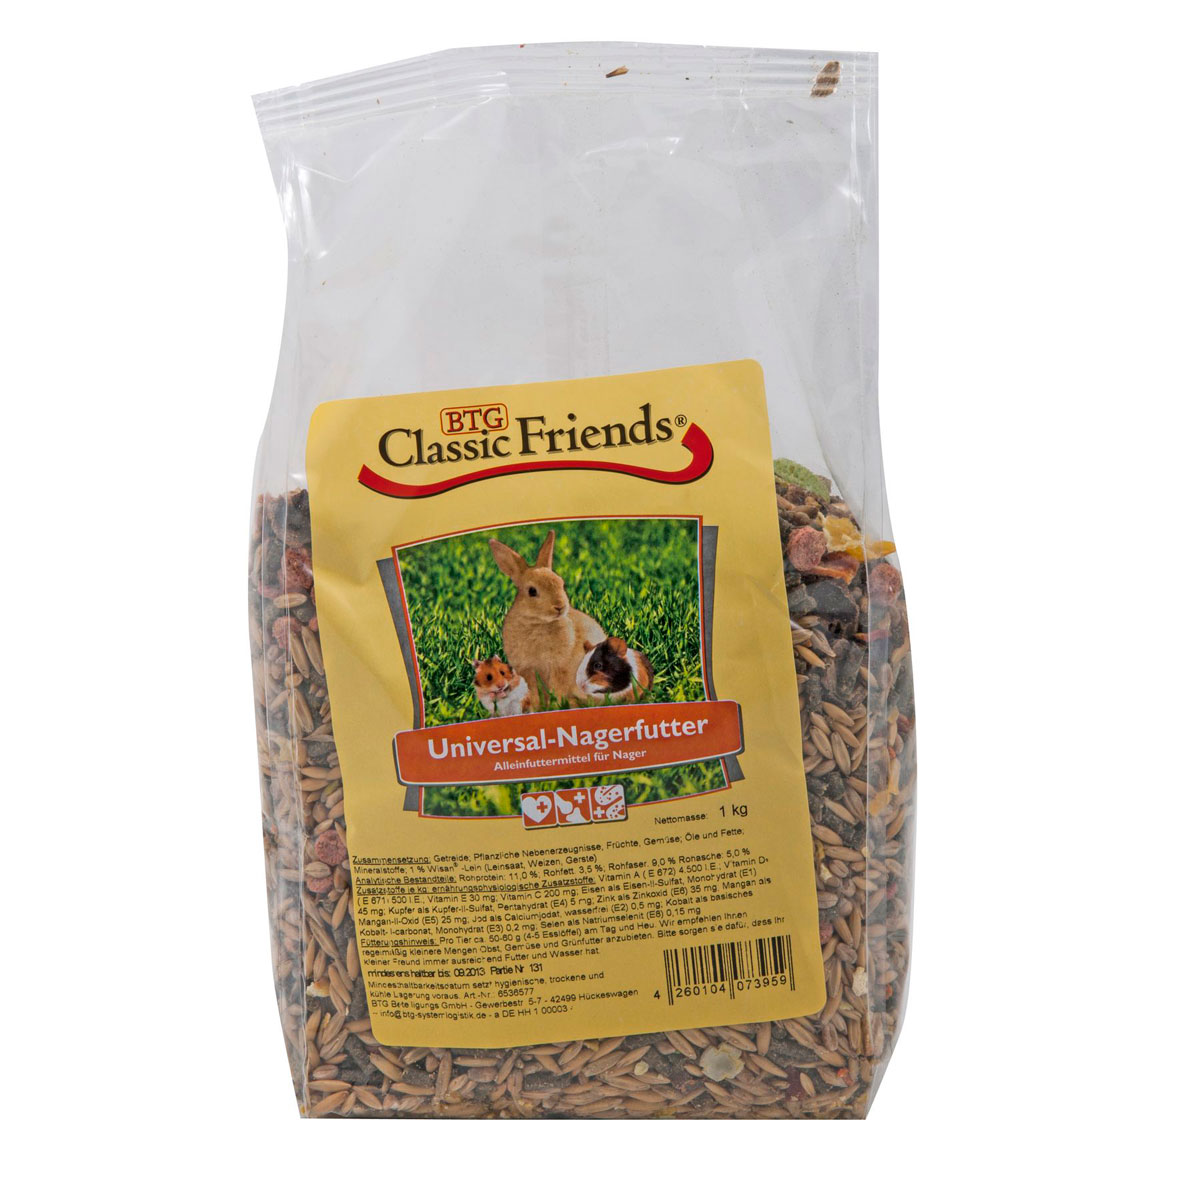 Classic Friends Universal Nagerfutter 1kg